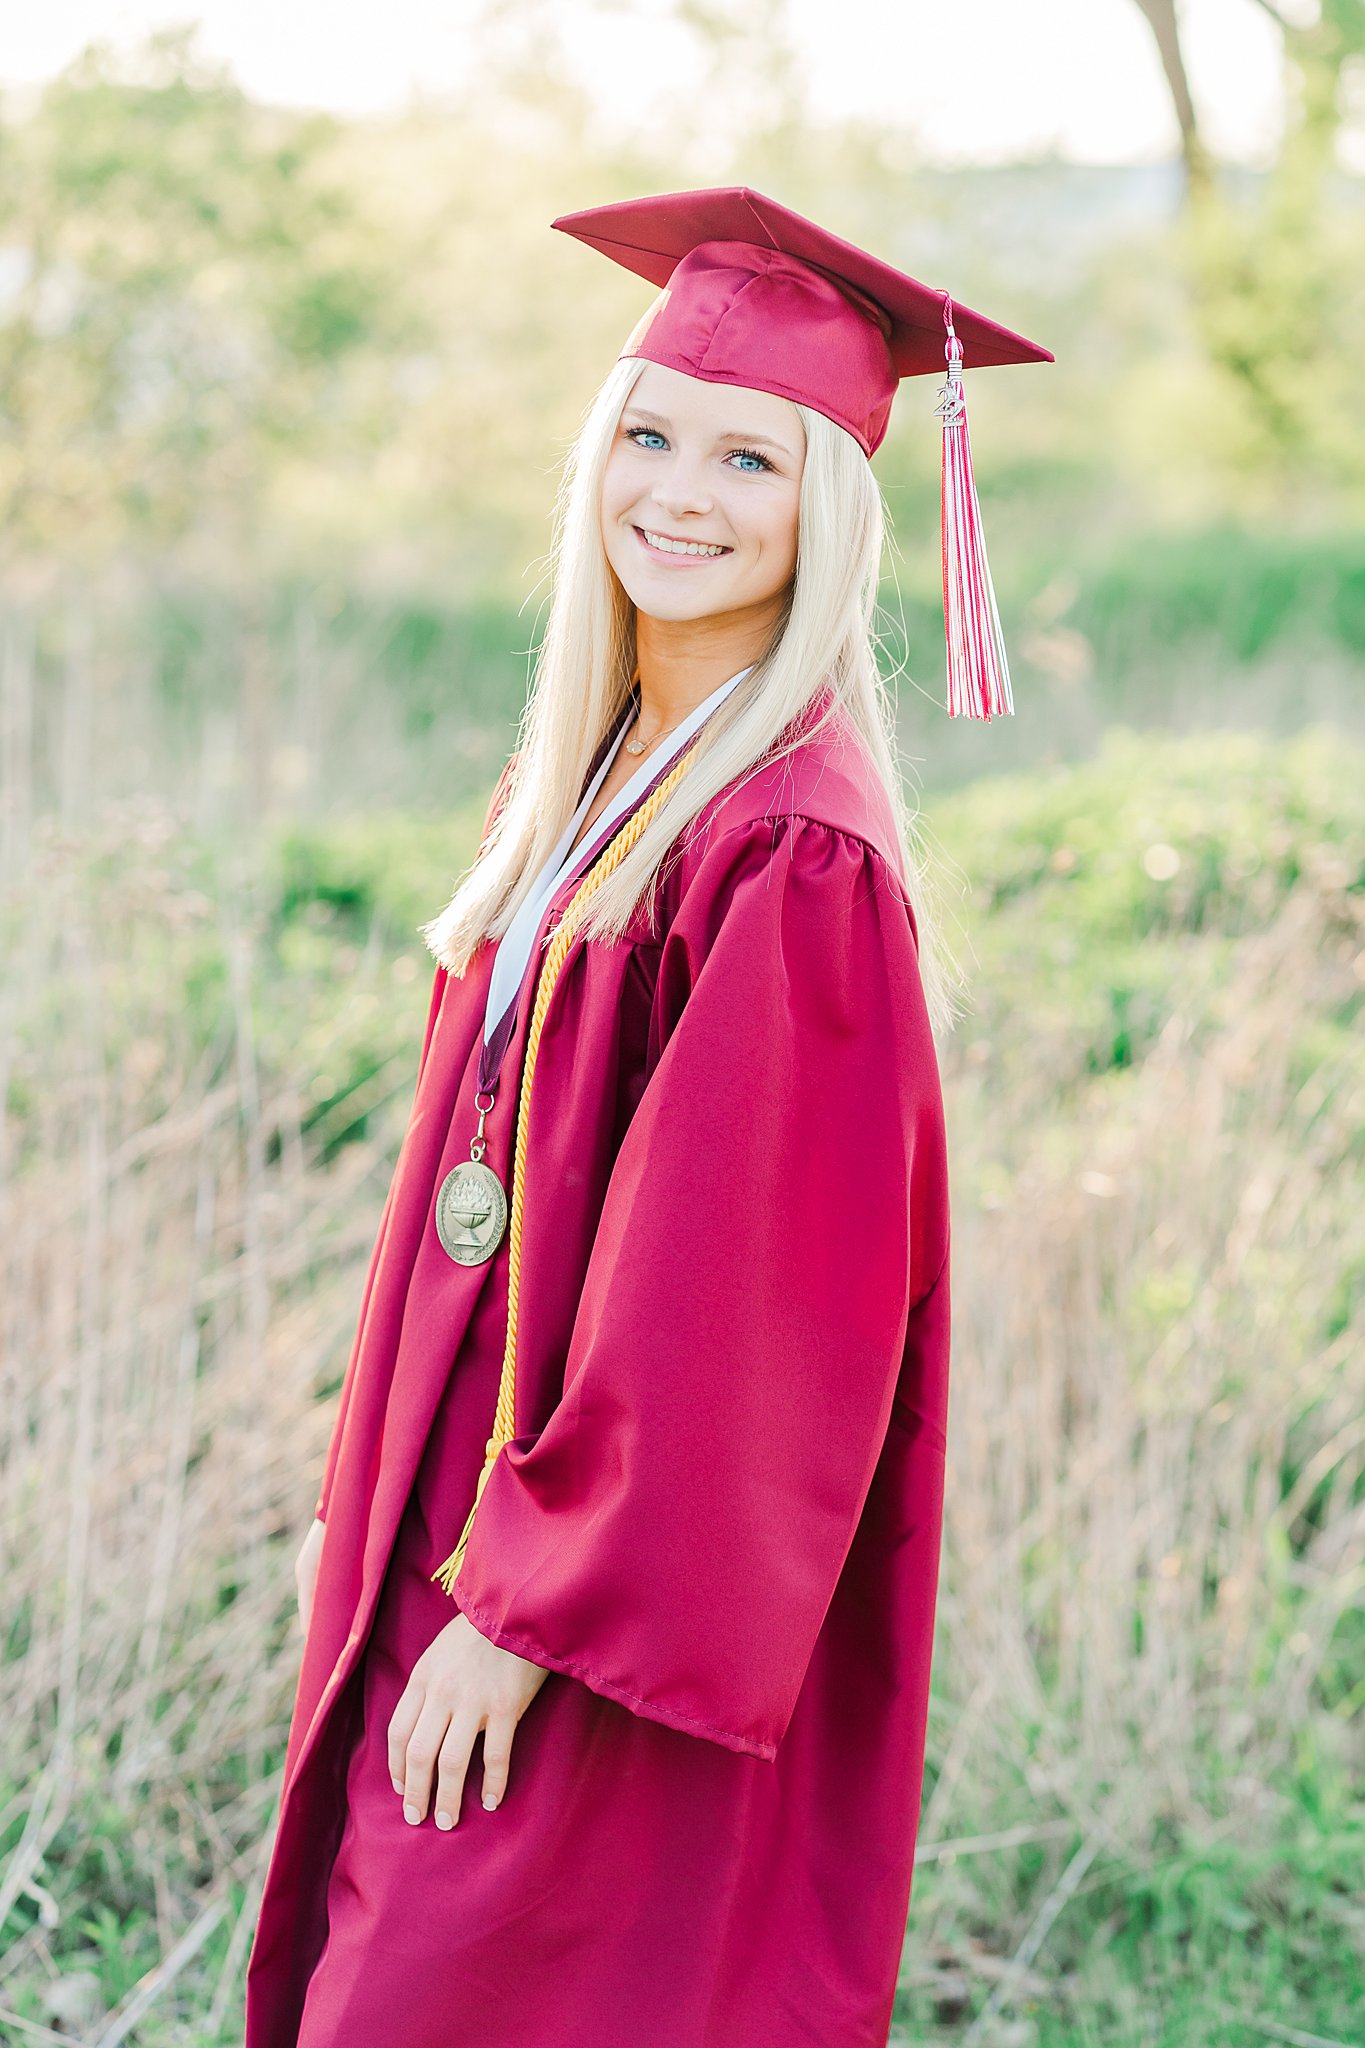 Girl wearing graduation robe and cap stands in a field with tall grass